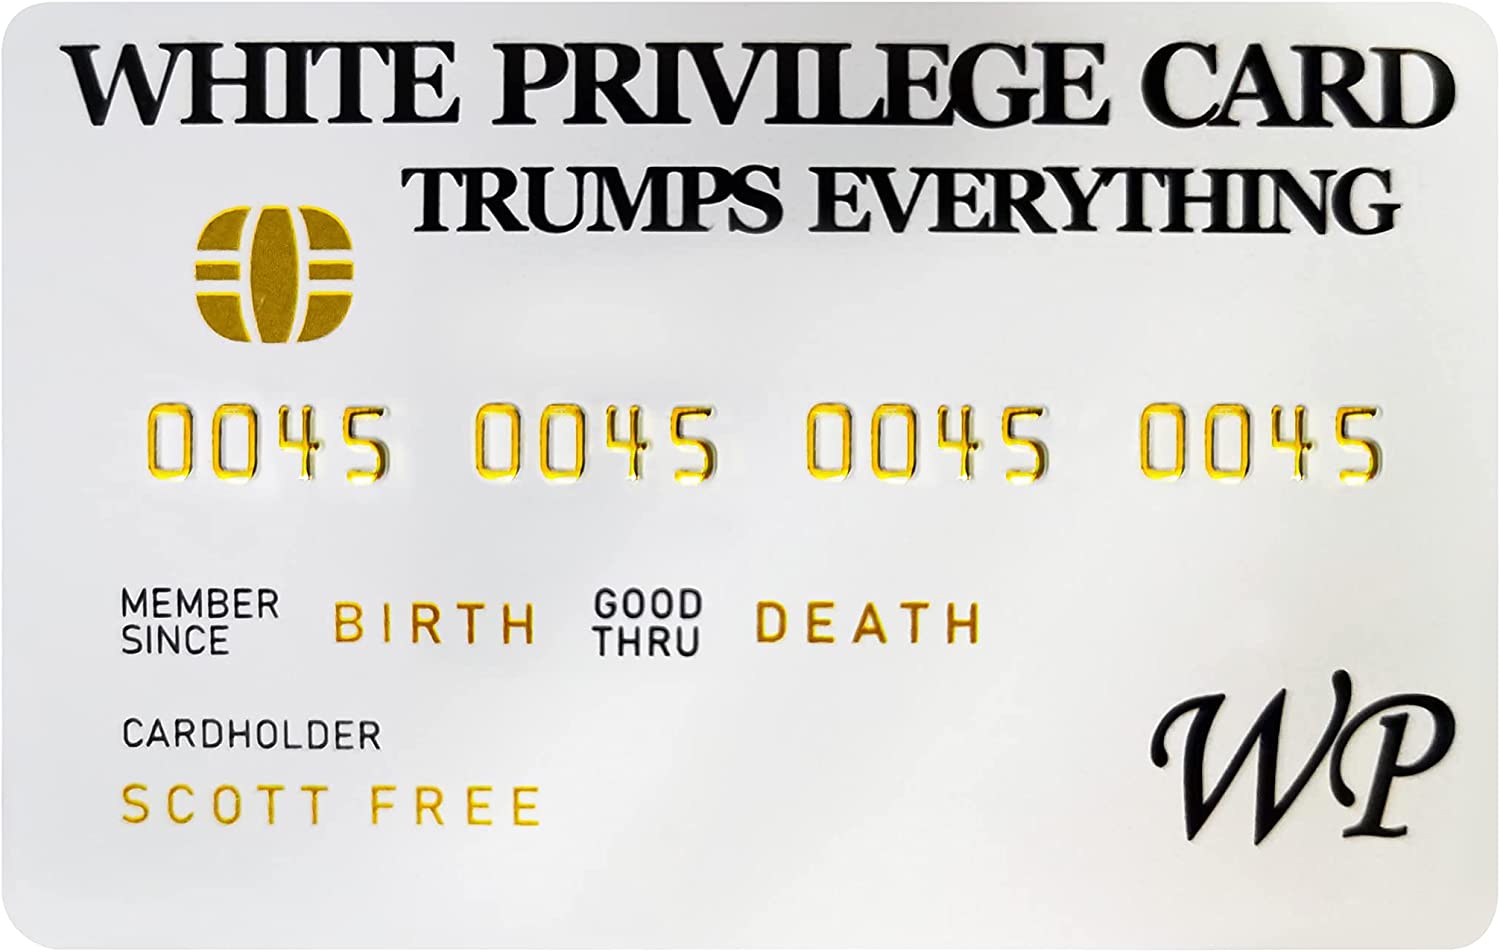 Send a Voice Message to get your FREE White Privilege Card!